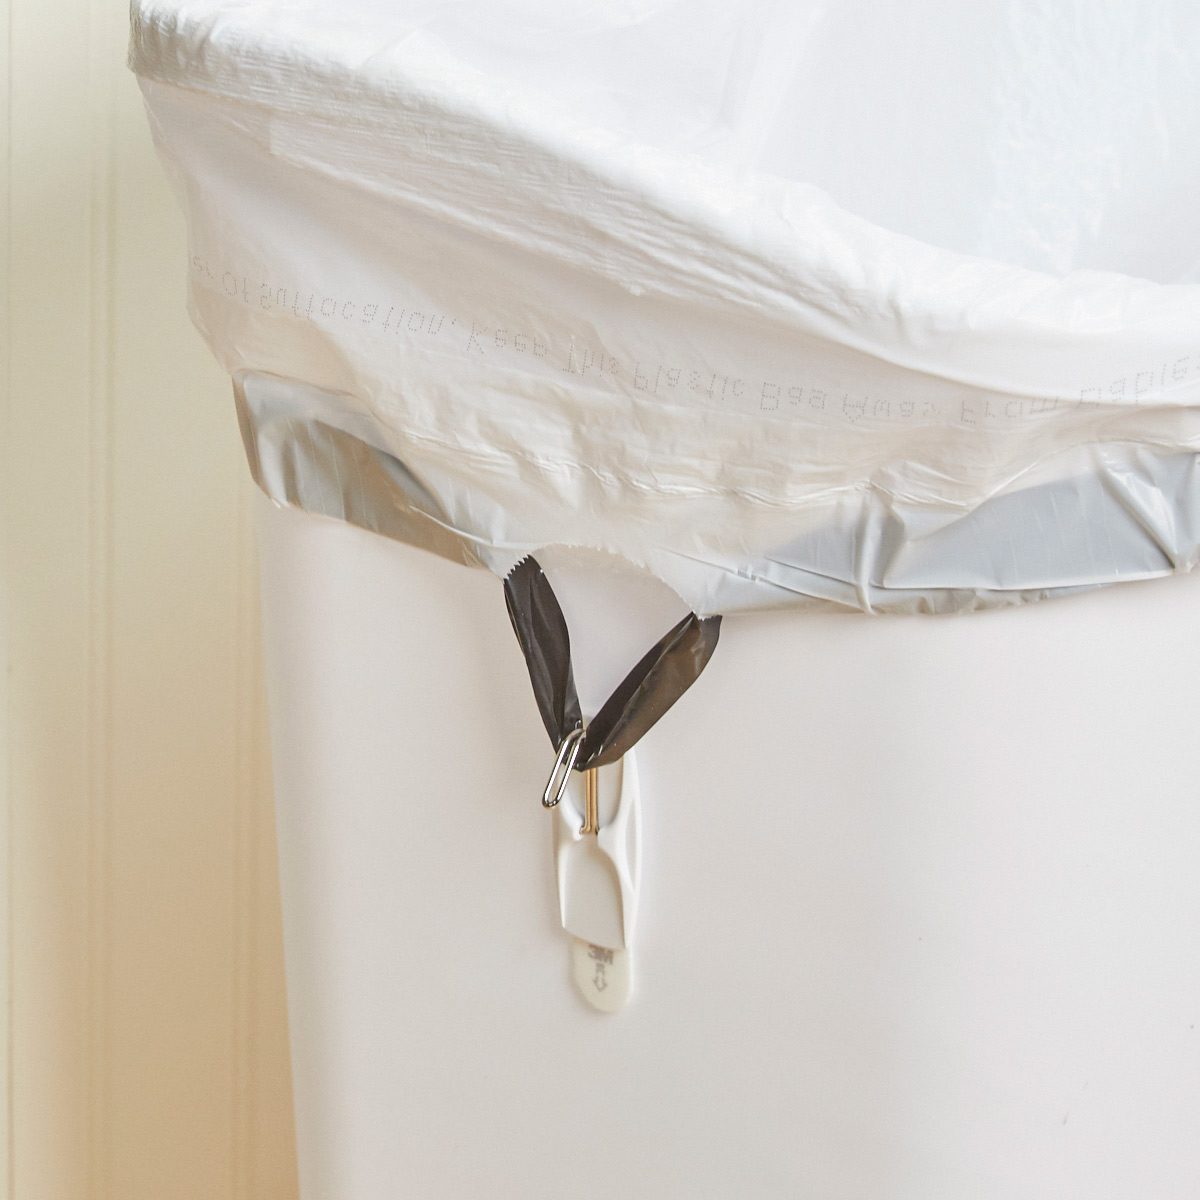 HH secure garbage bag with command hook